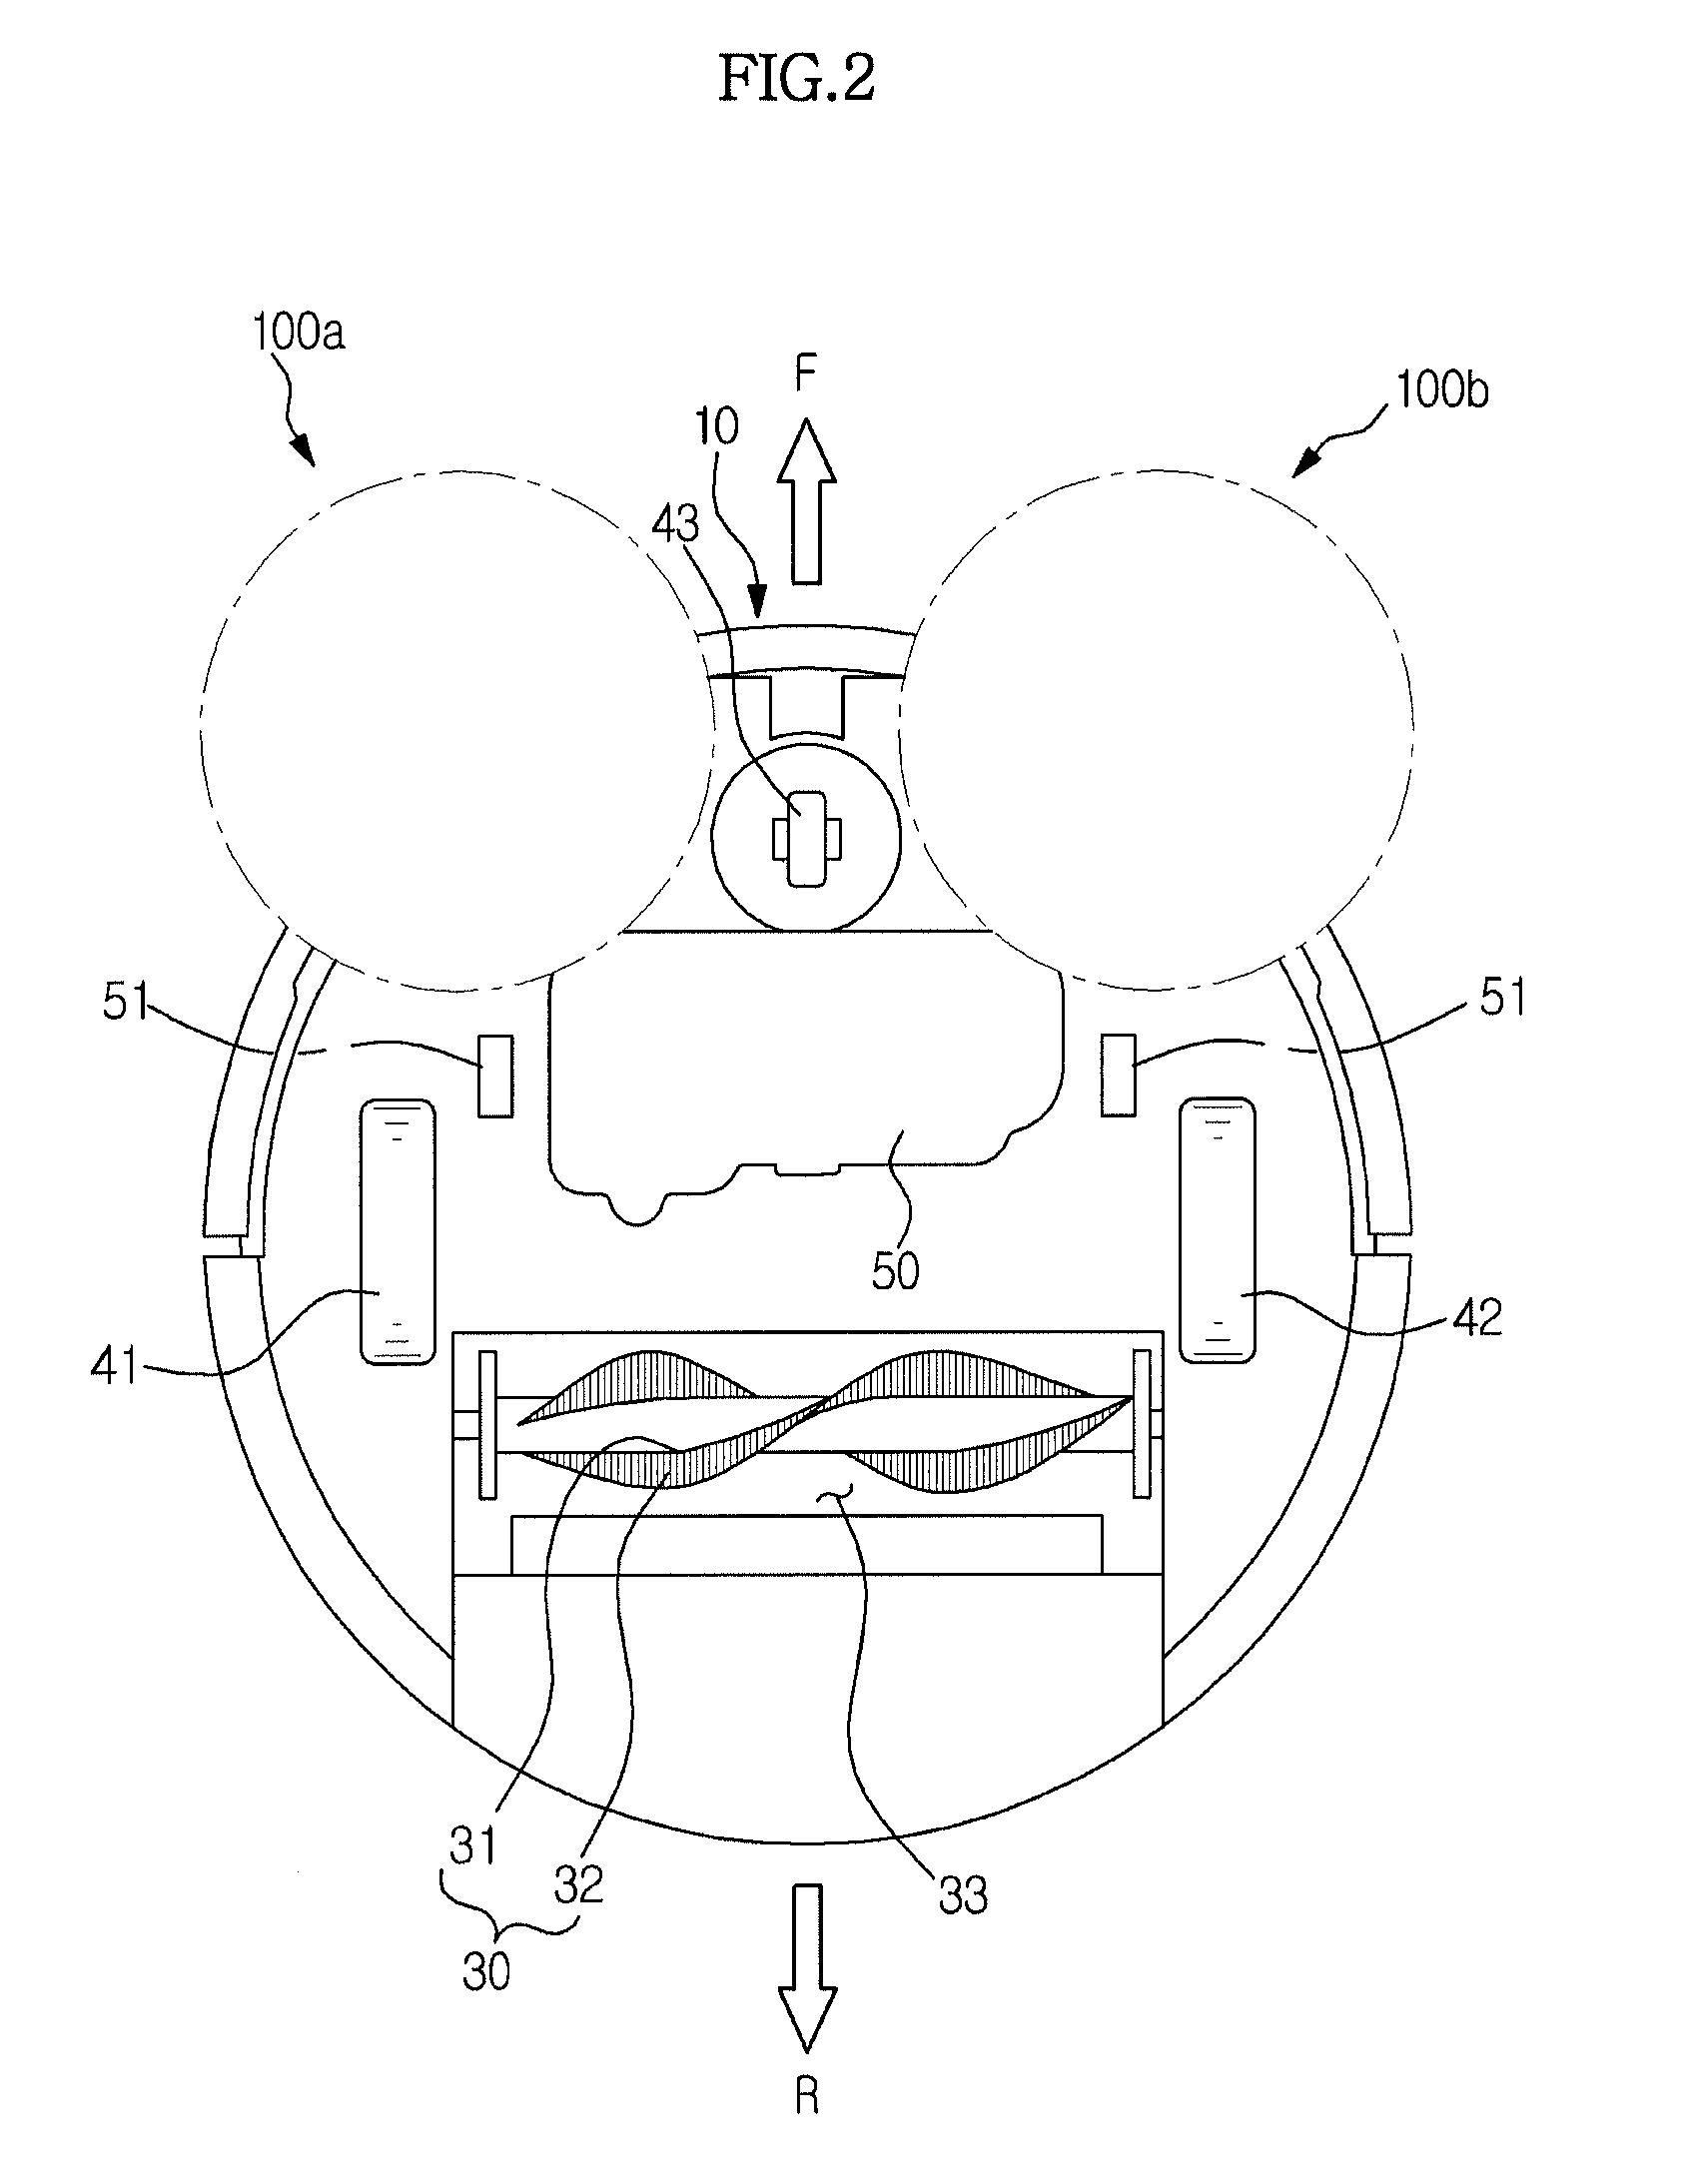 Robot cleaner and method for controlling the same